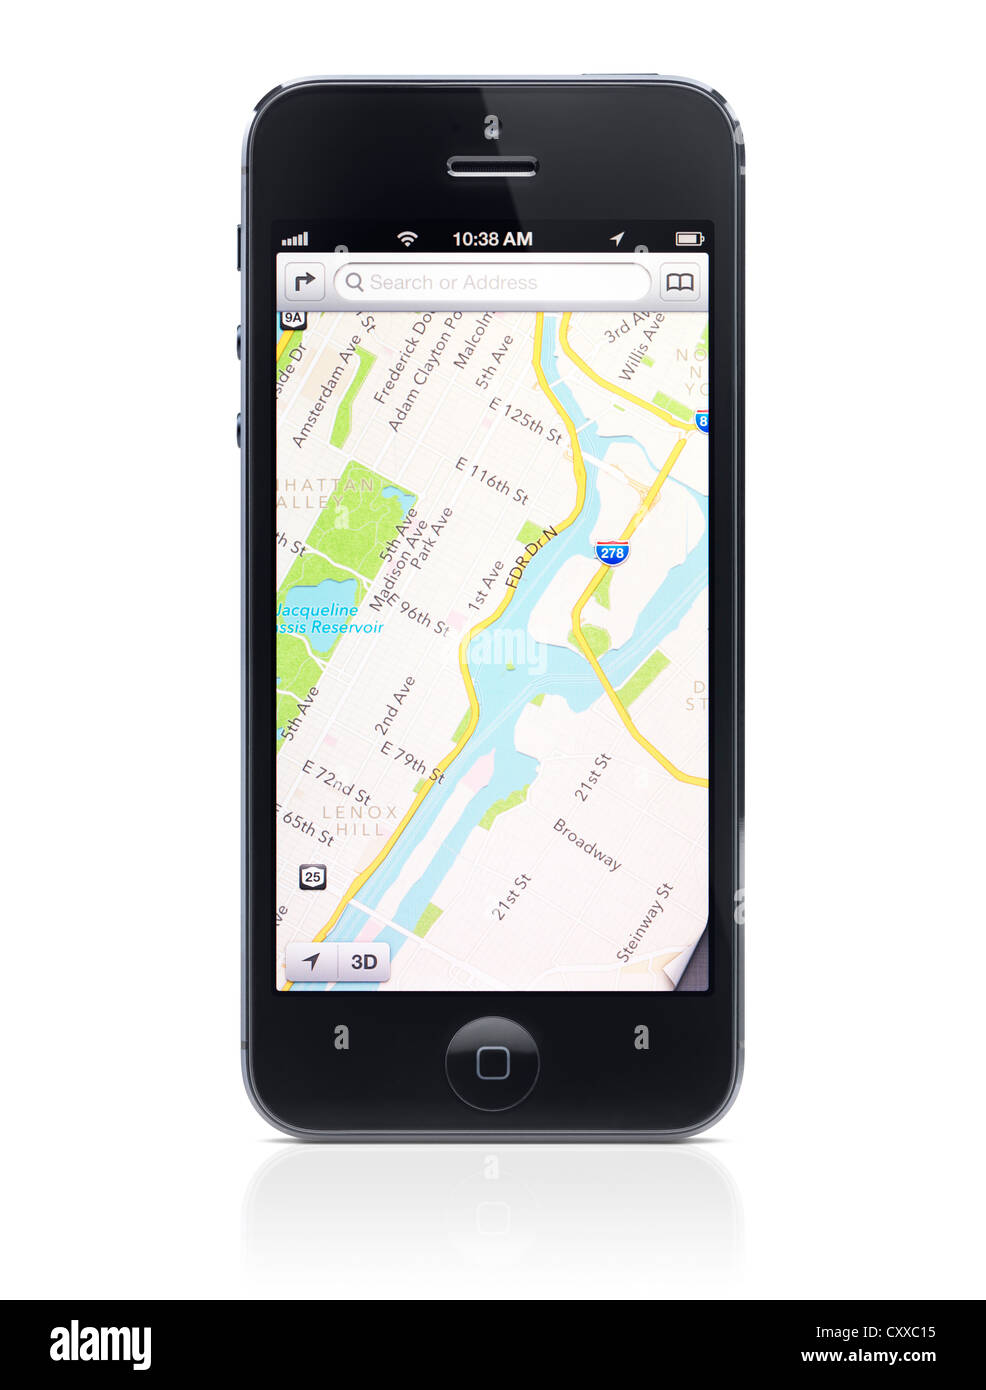 billig rangle Ferie iPhone 5 with Apple map app, new Apple mapping service on its display  isolated on white background with clipping path Stock Photo - Alamy